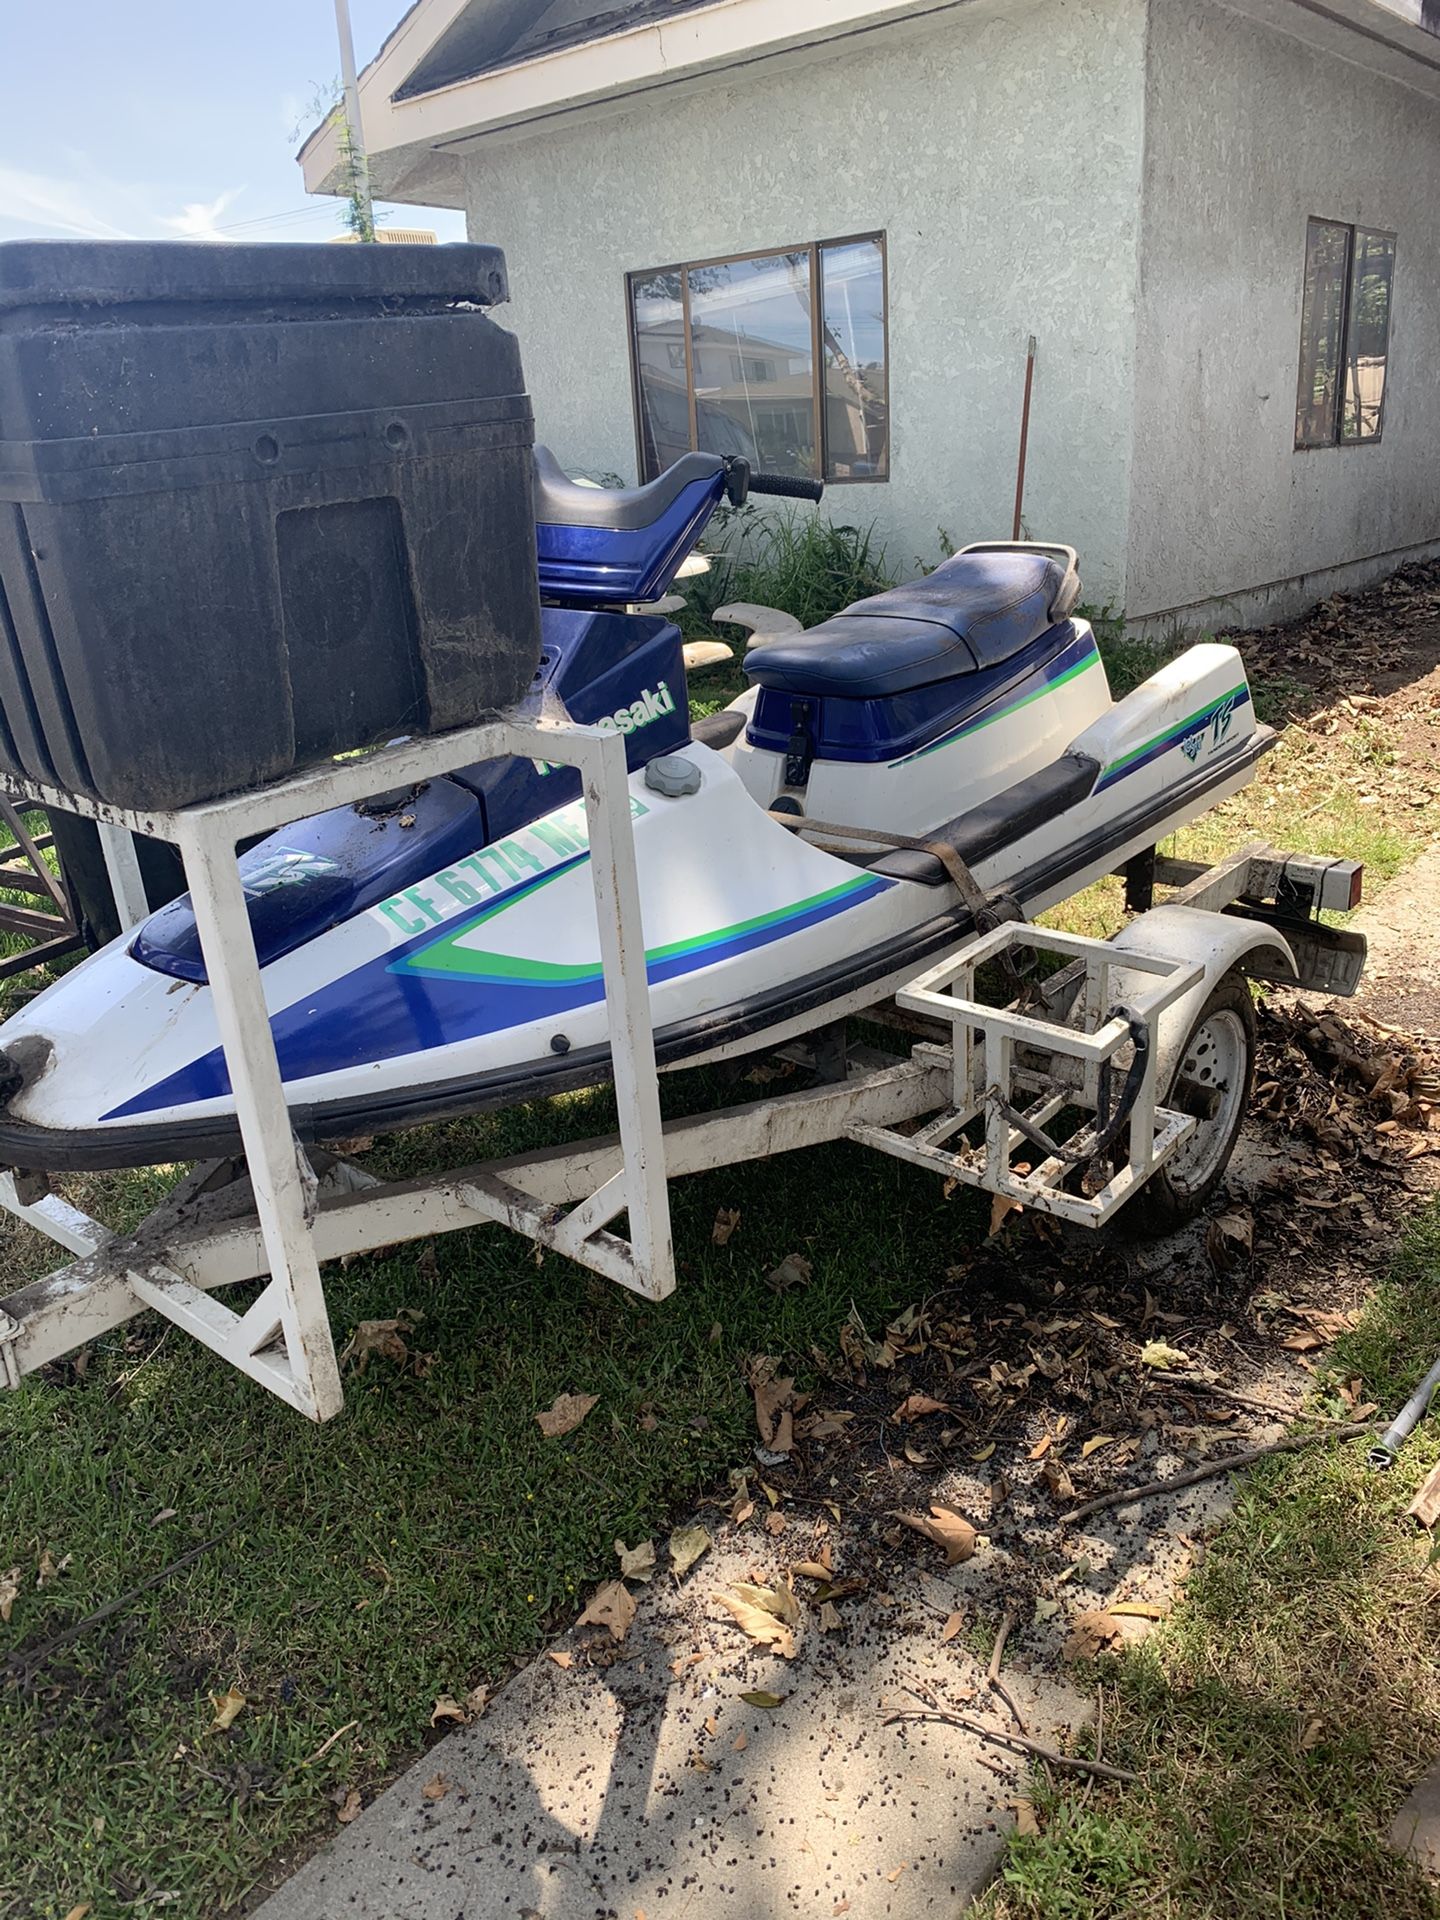 Free jet ski and trailer 1992 first come first serve!